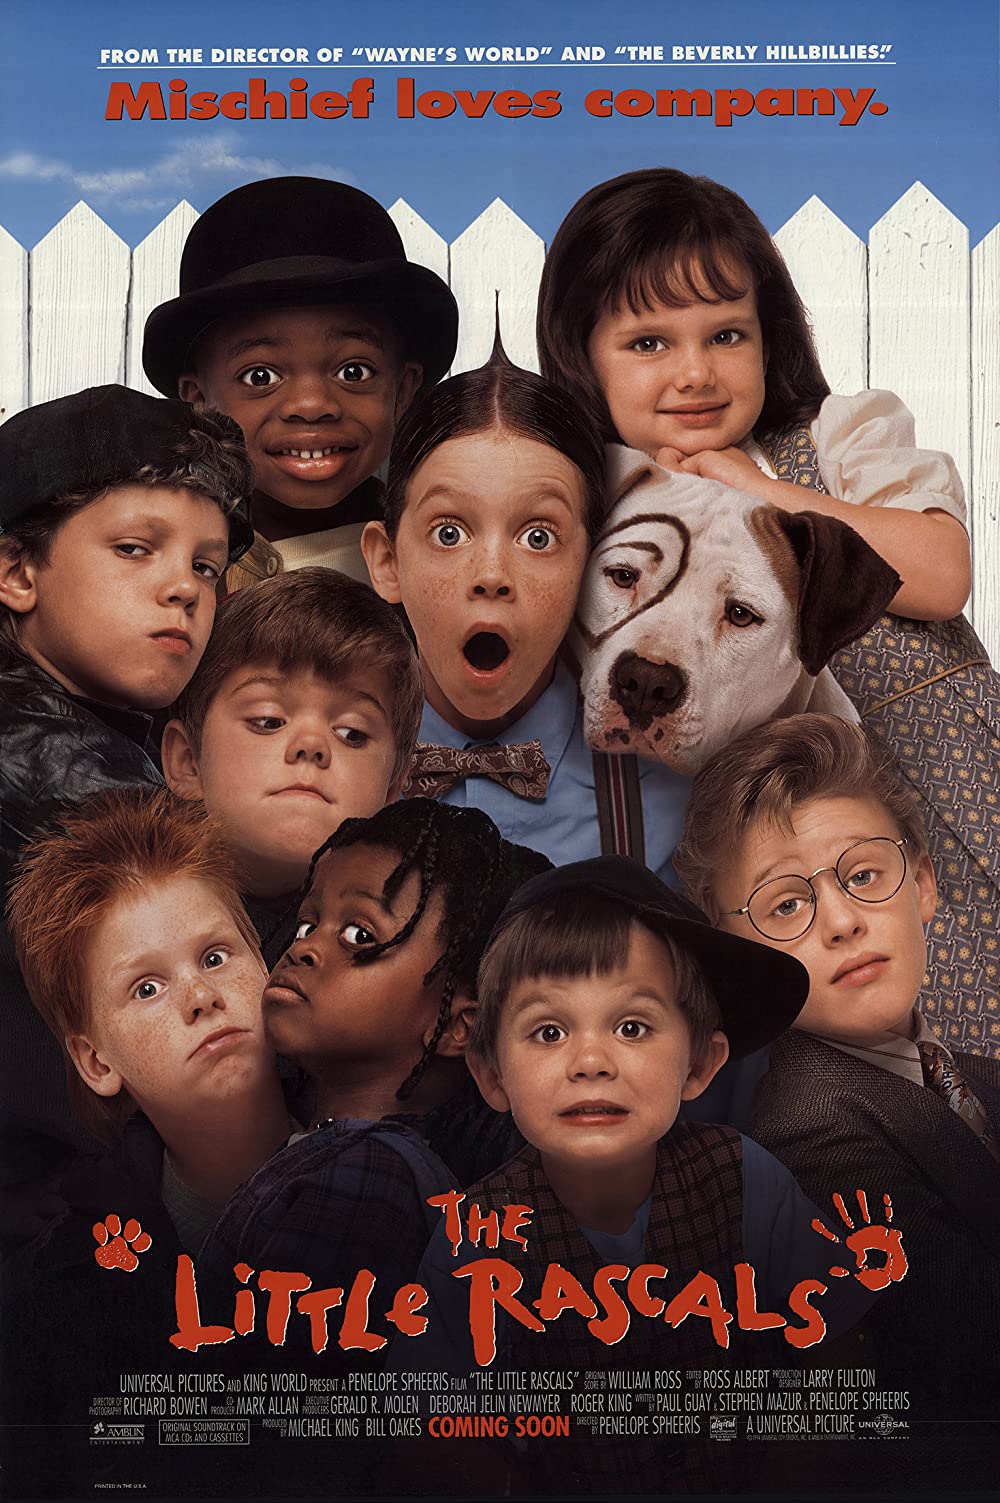 The Little Rascals movie poster